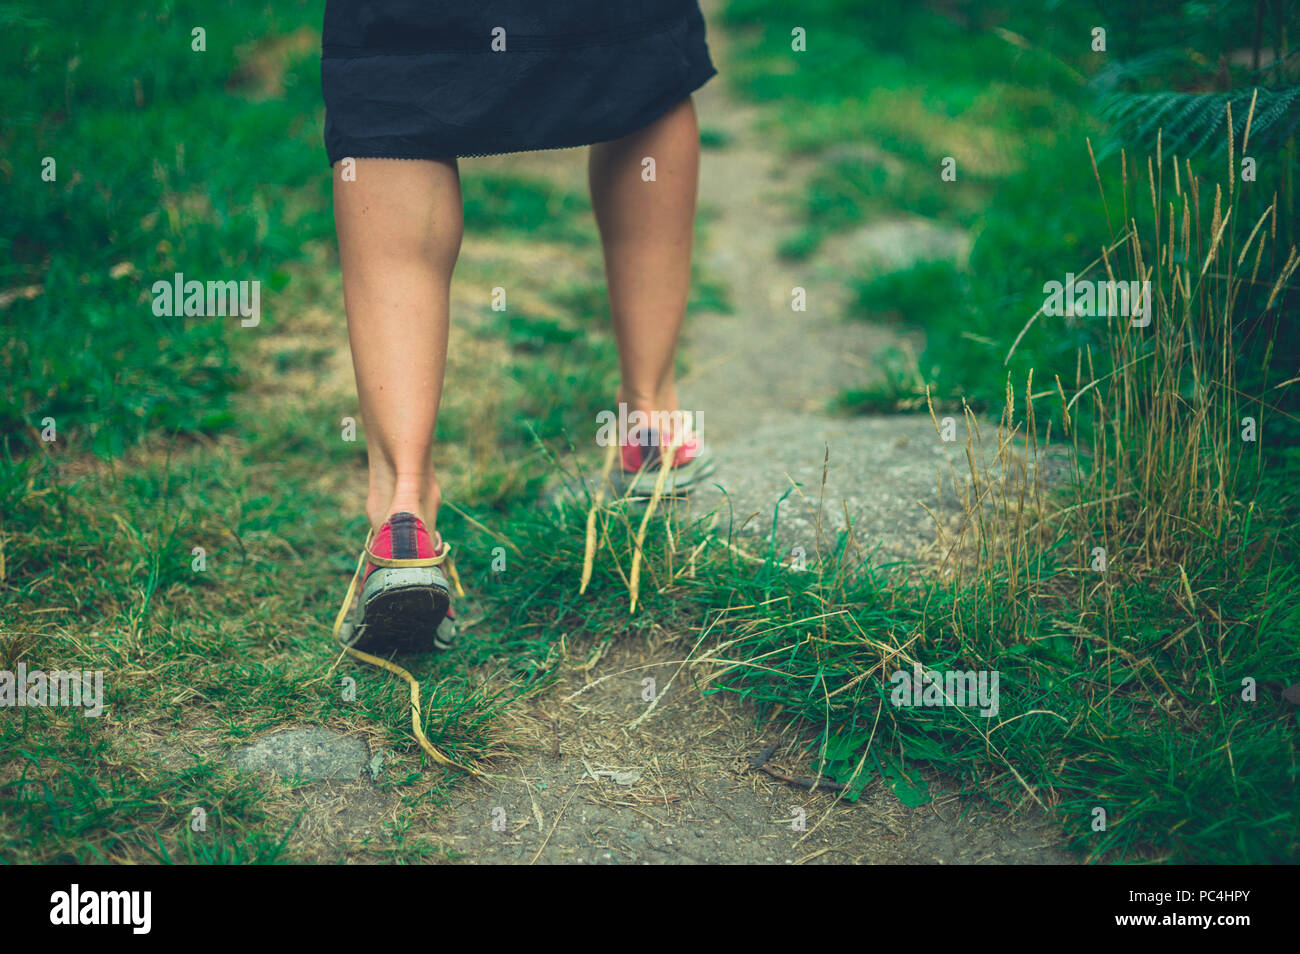 A young woman with undone shoe laces is walking in nature Stock Photo